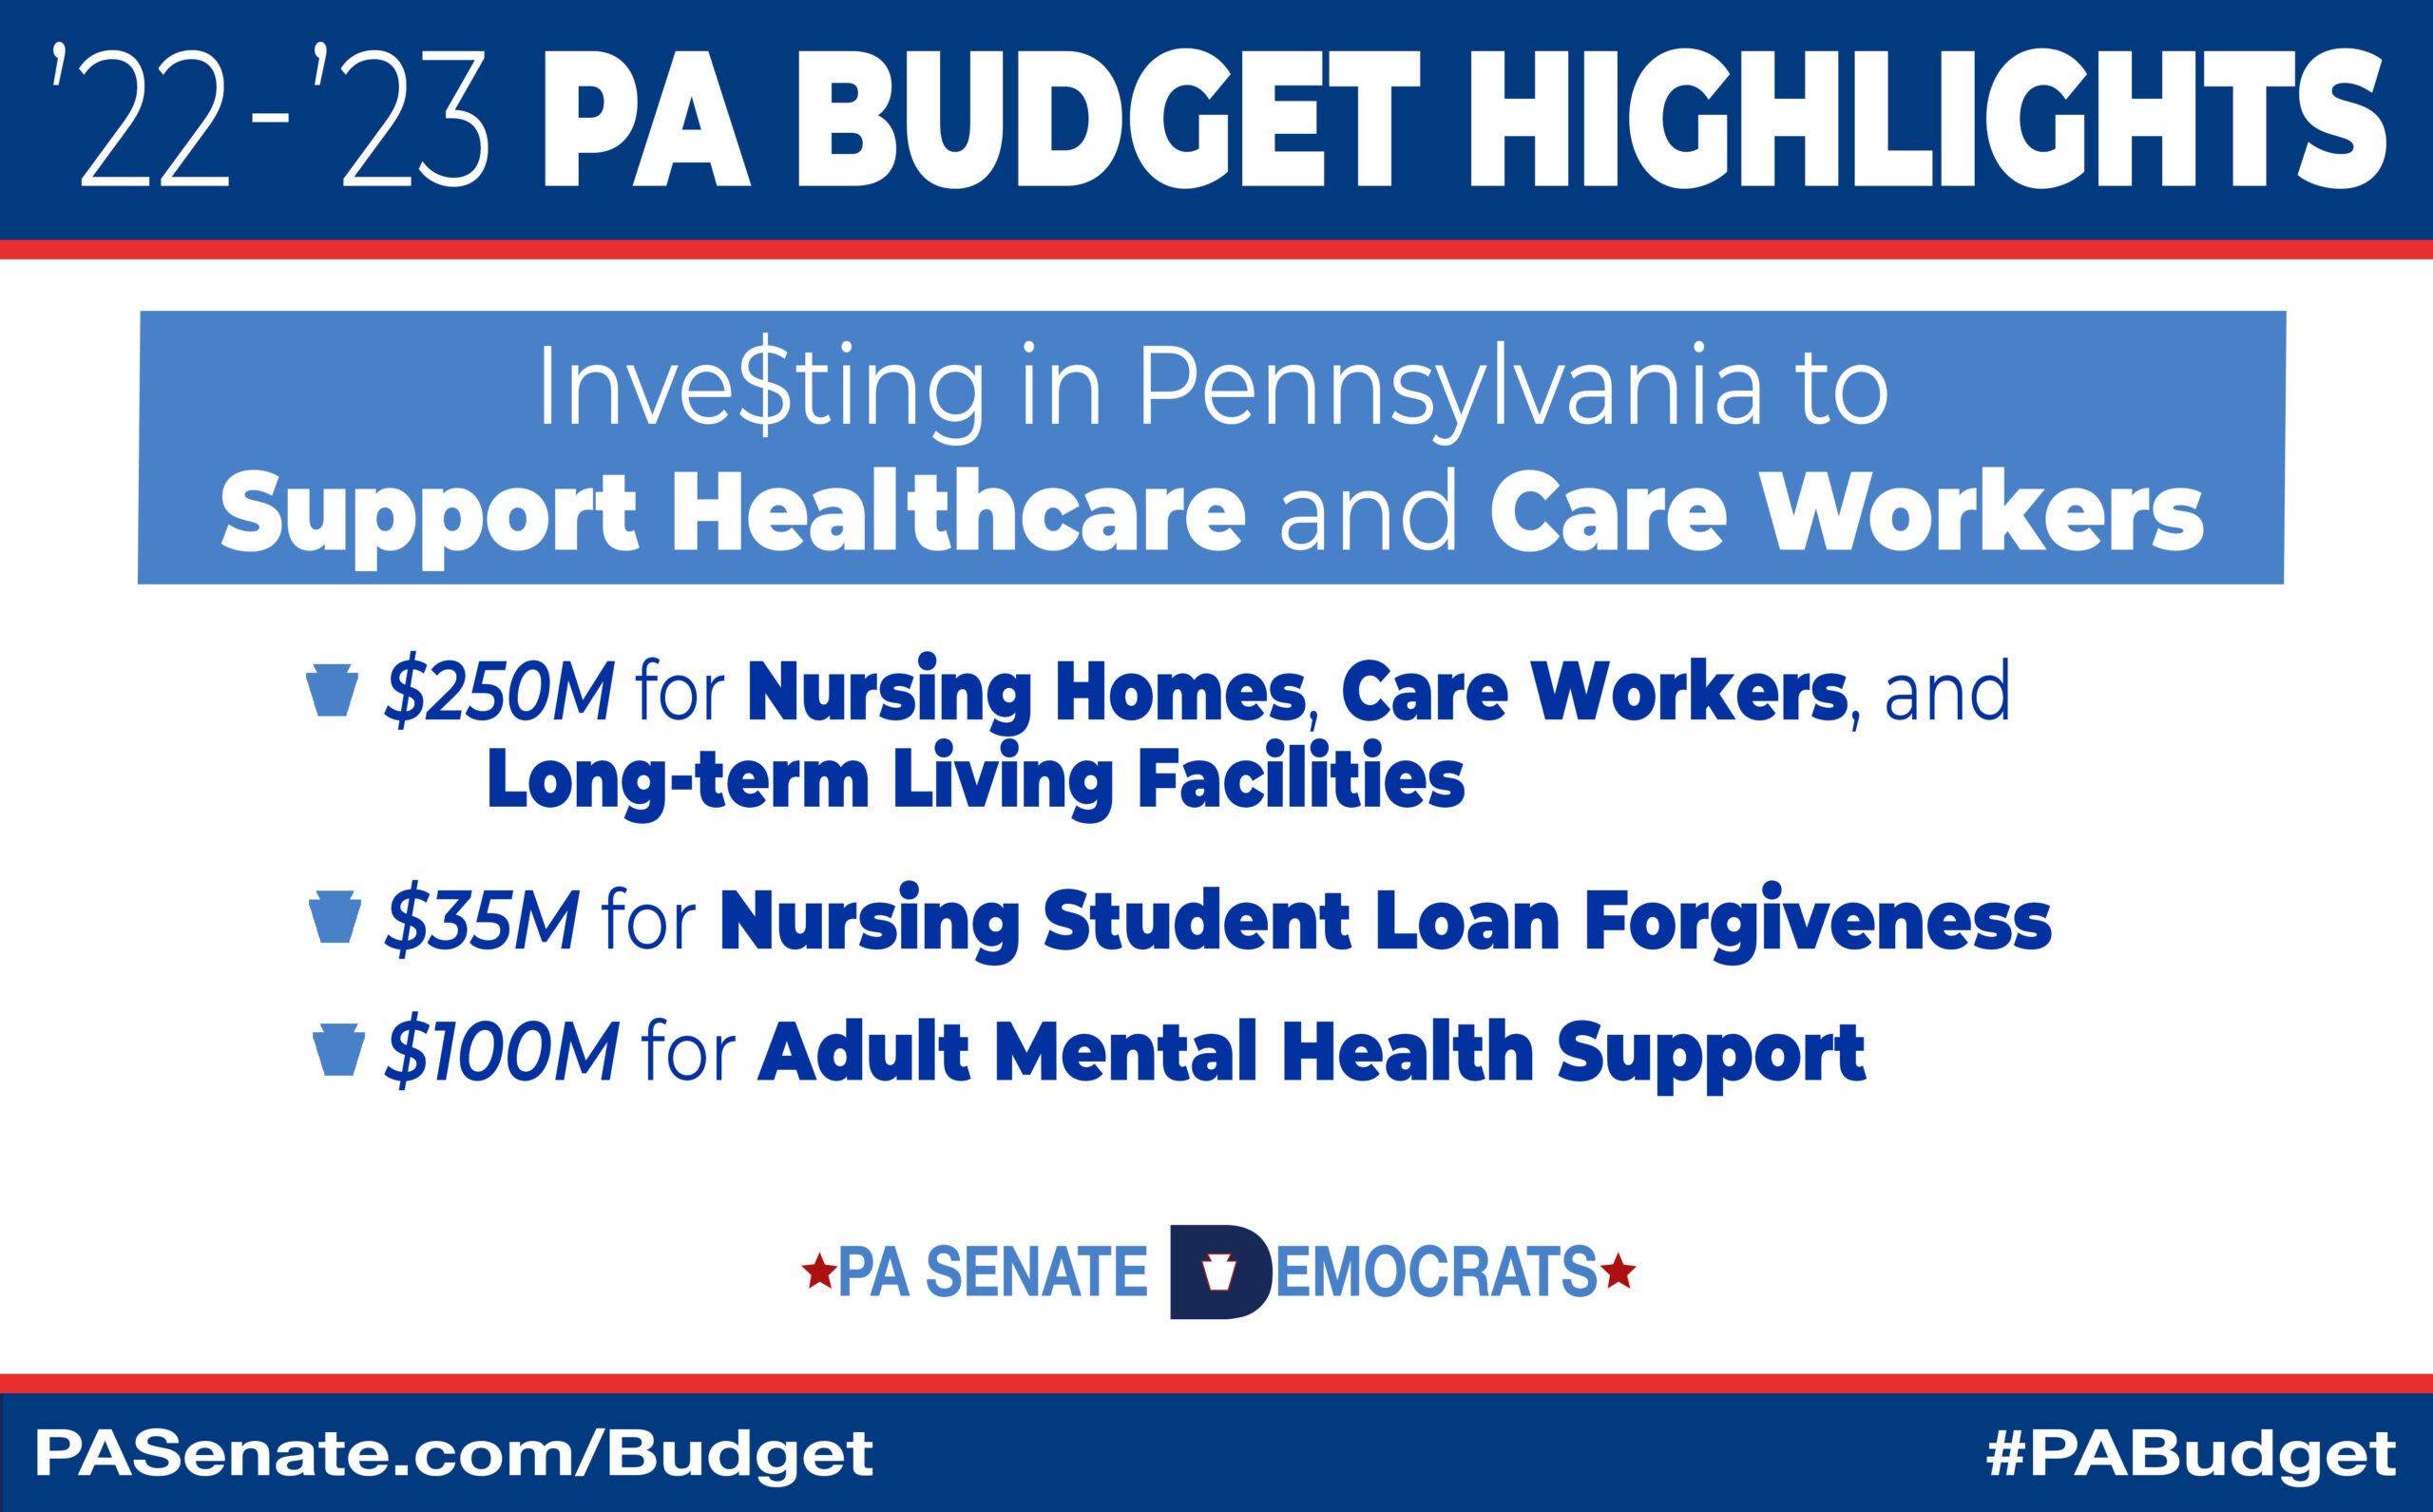 Investing in Pennsylvania to Support Healthcare and Care Workers